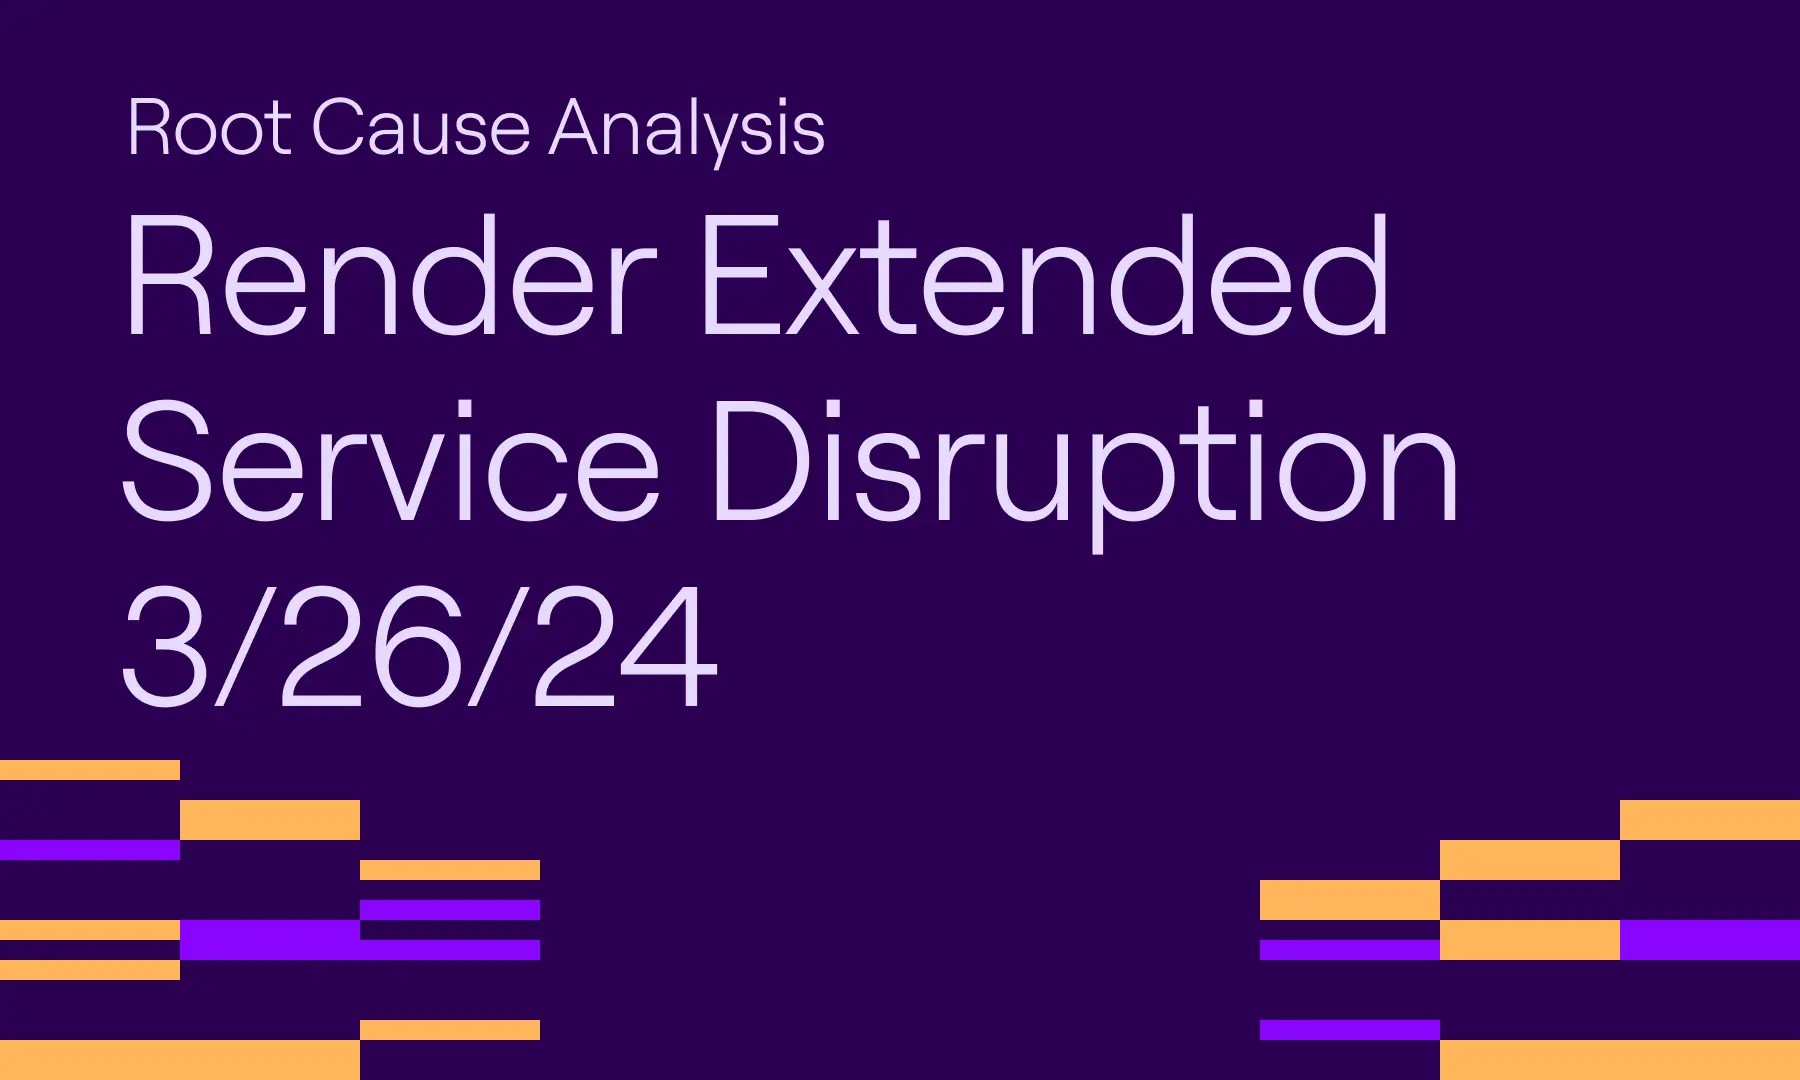 Root Cause Analysis for Render's Extended Service Disruption on 3/26/24